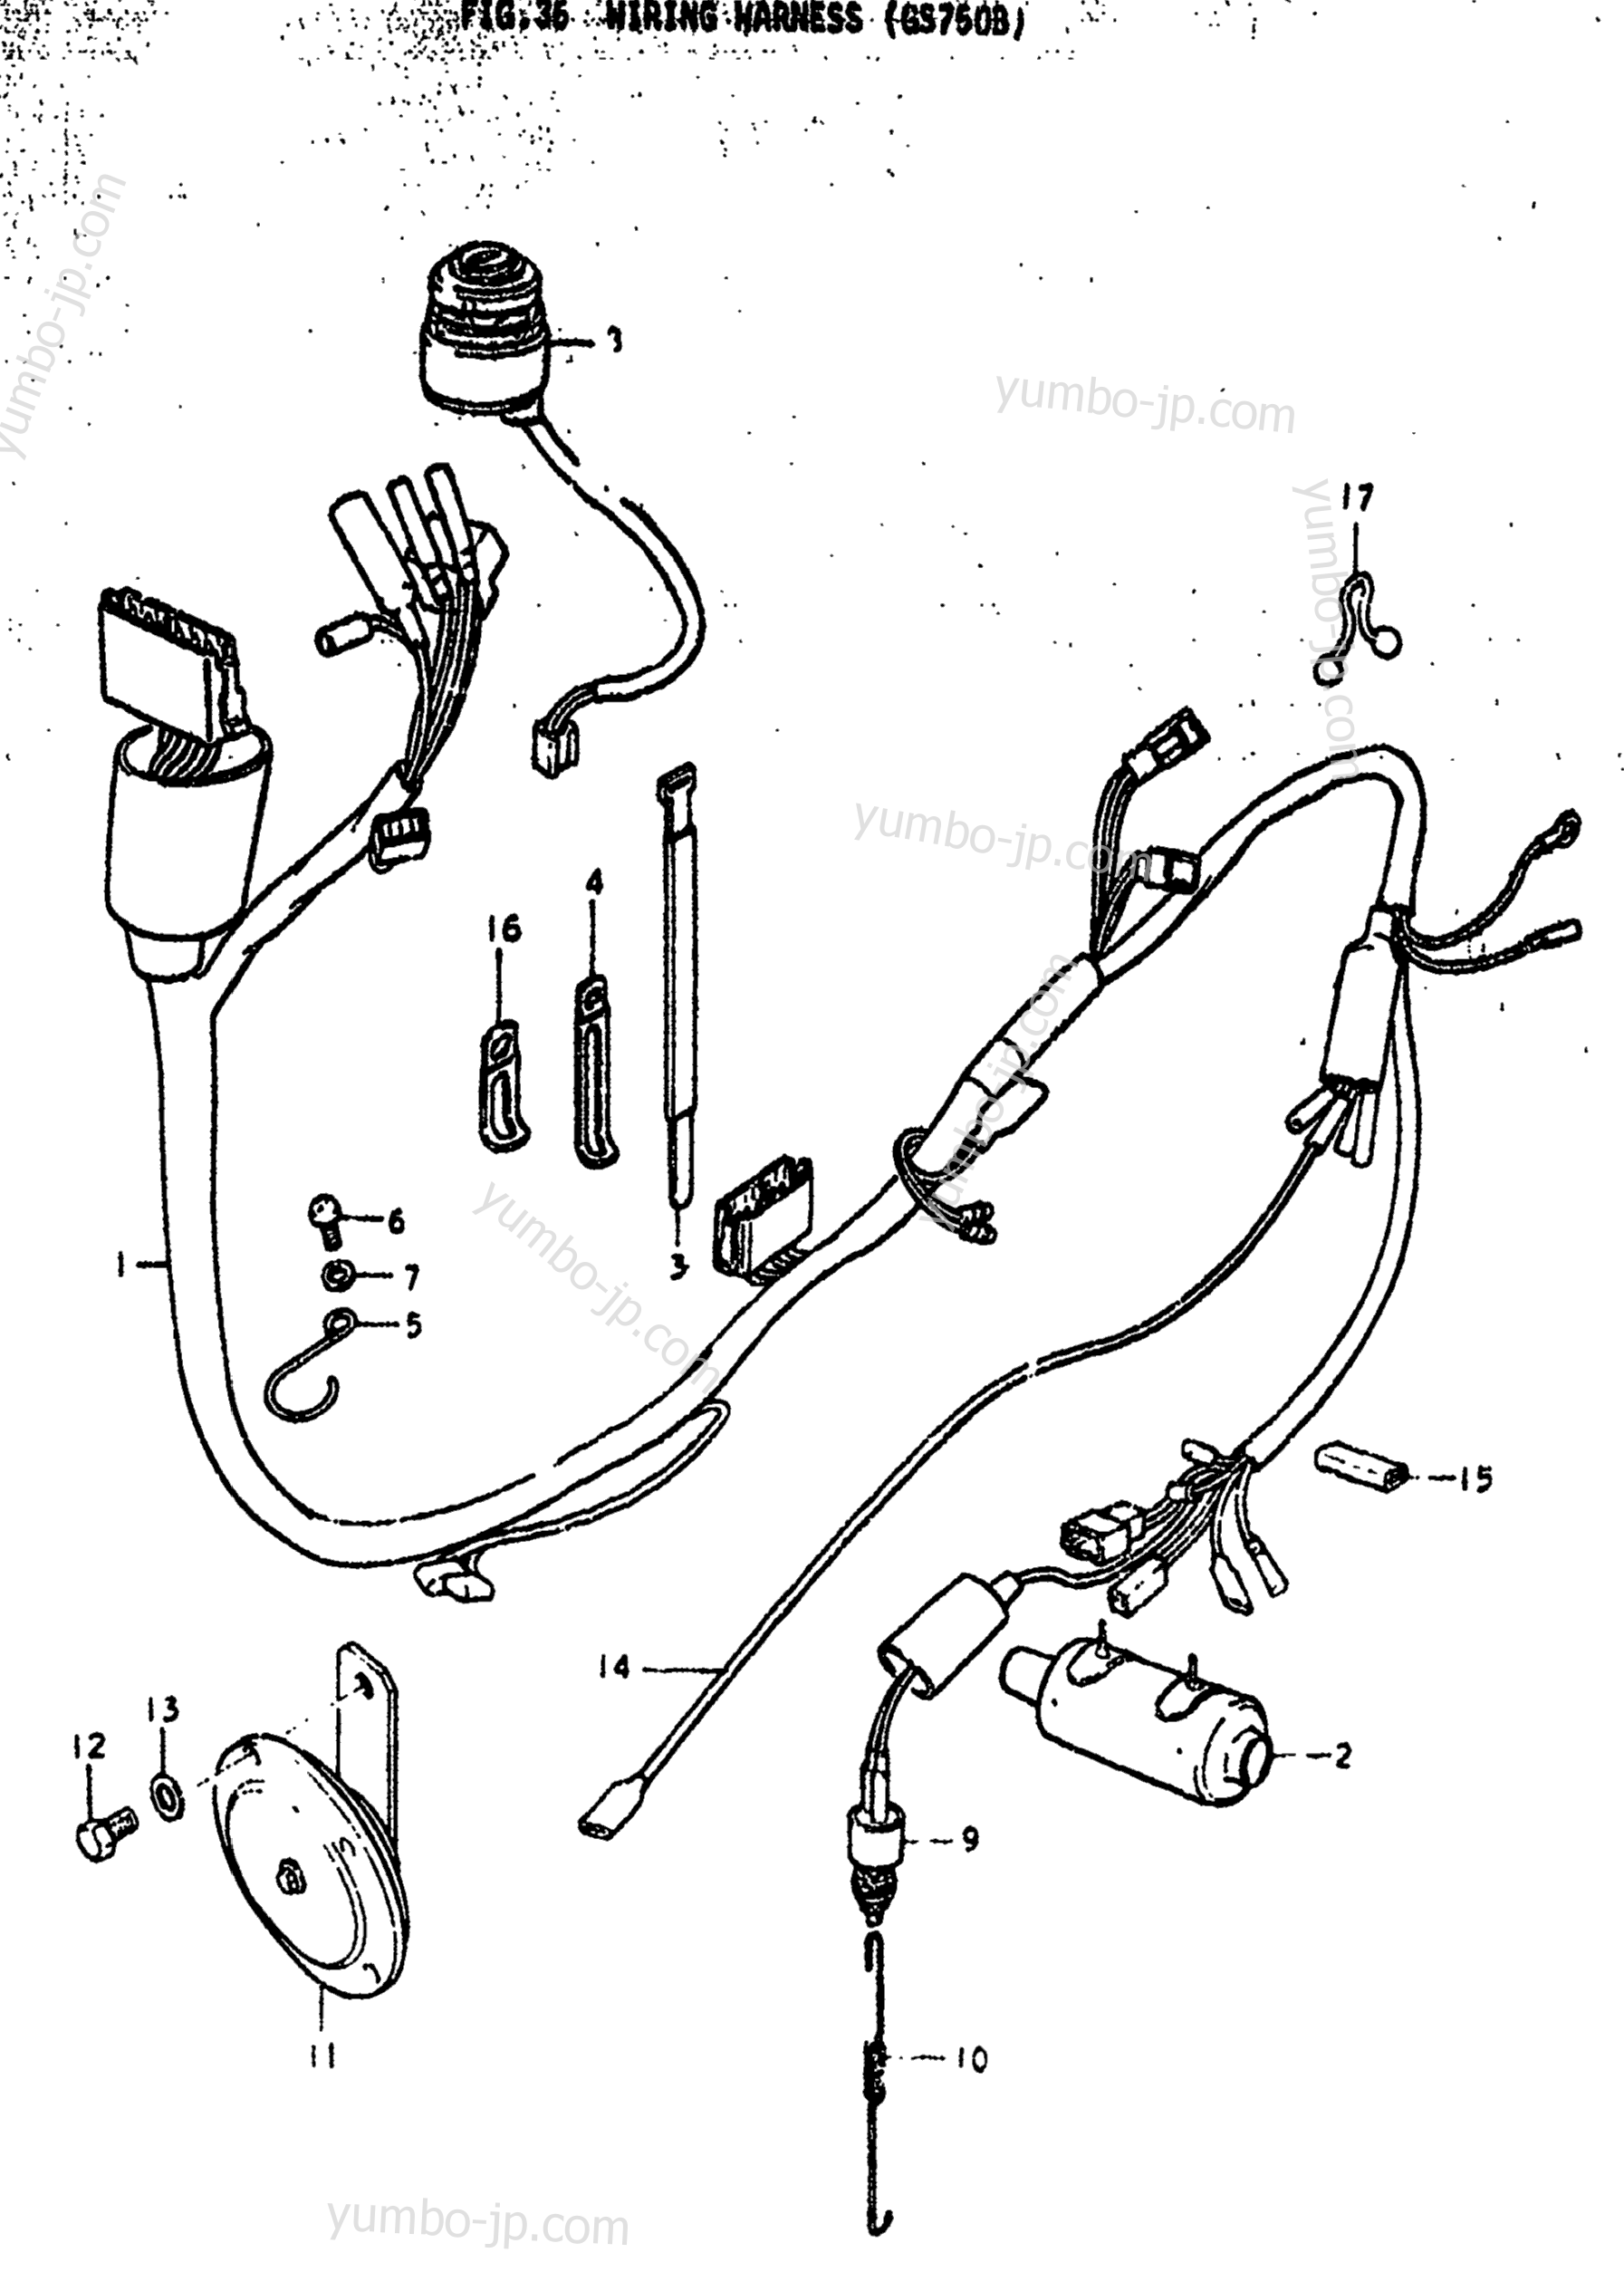 WIRING HARNESS (GS750B) for motorcycles SUZUKI GS750N 1979 year